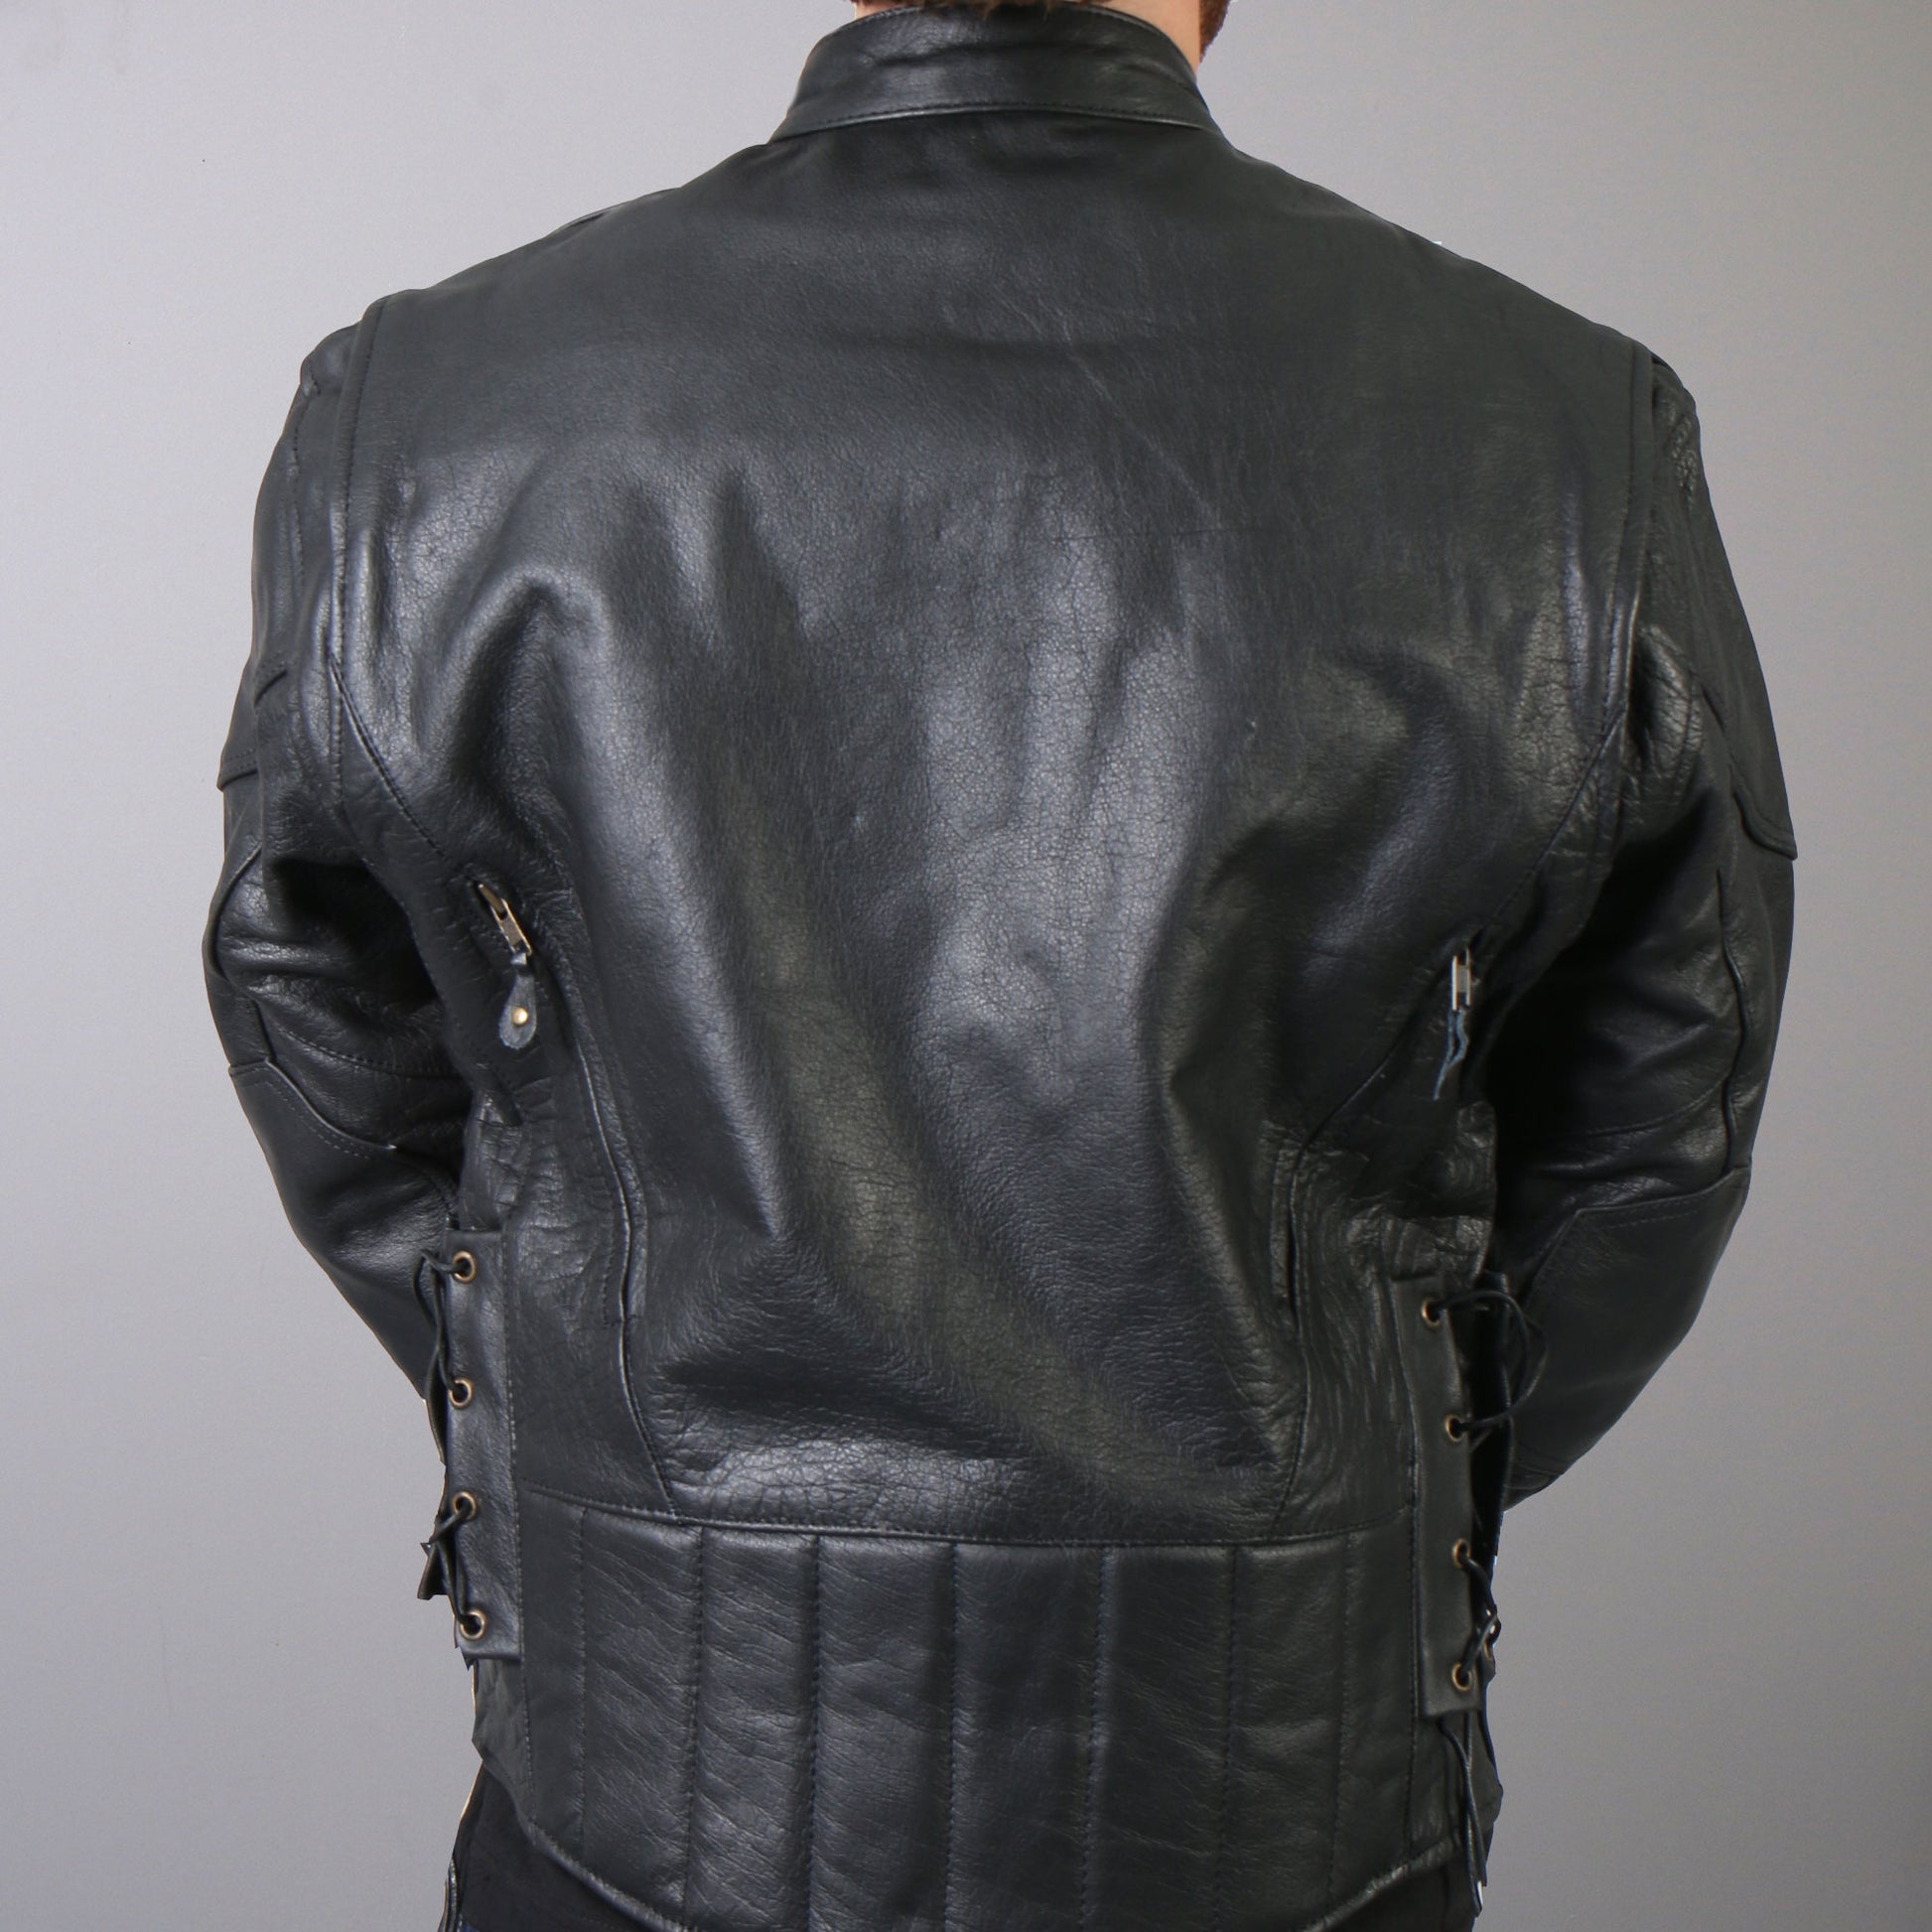 Hot Leathers JKM1010 Men's Vented Leather Jacket